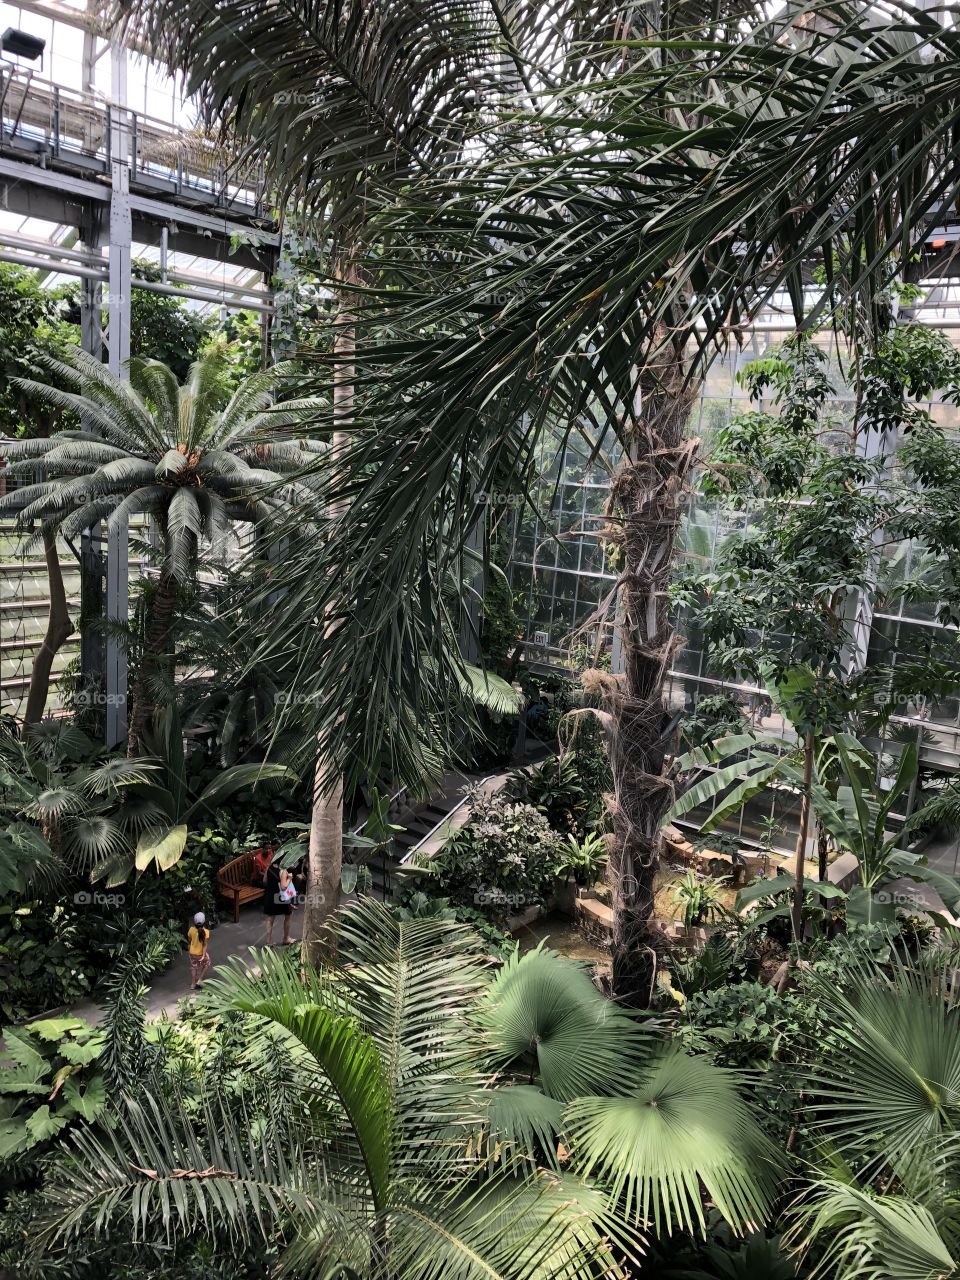 Serene view inside a large tropical conservatory with palm trees and children playing